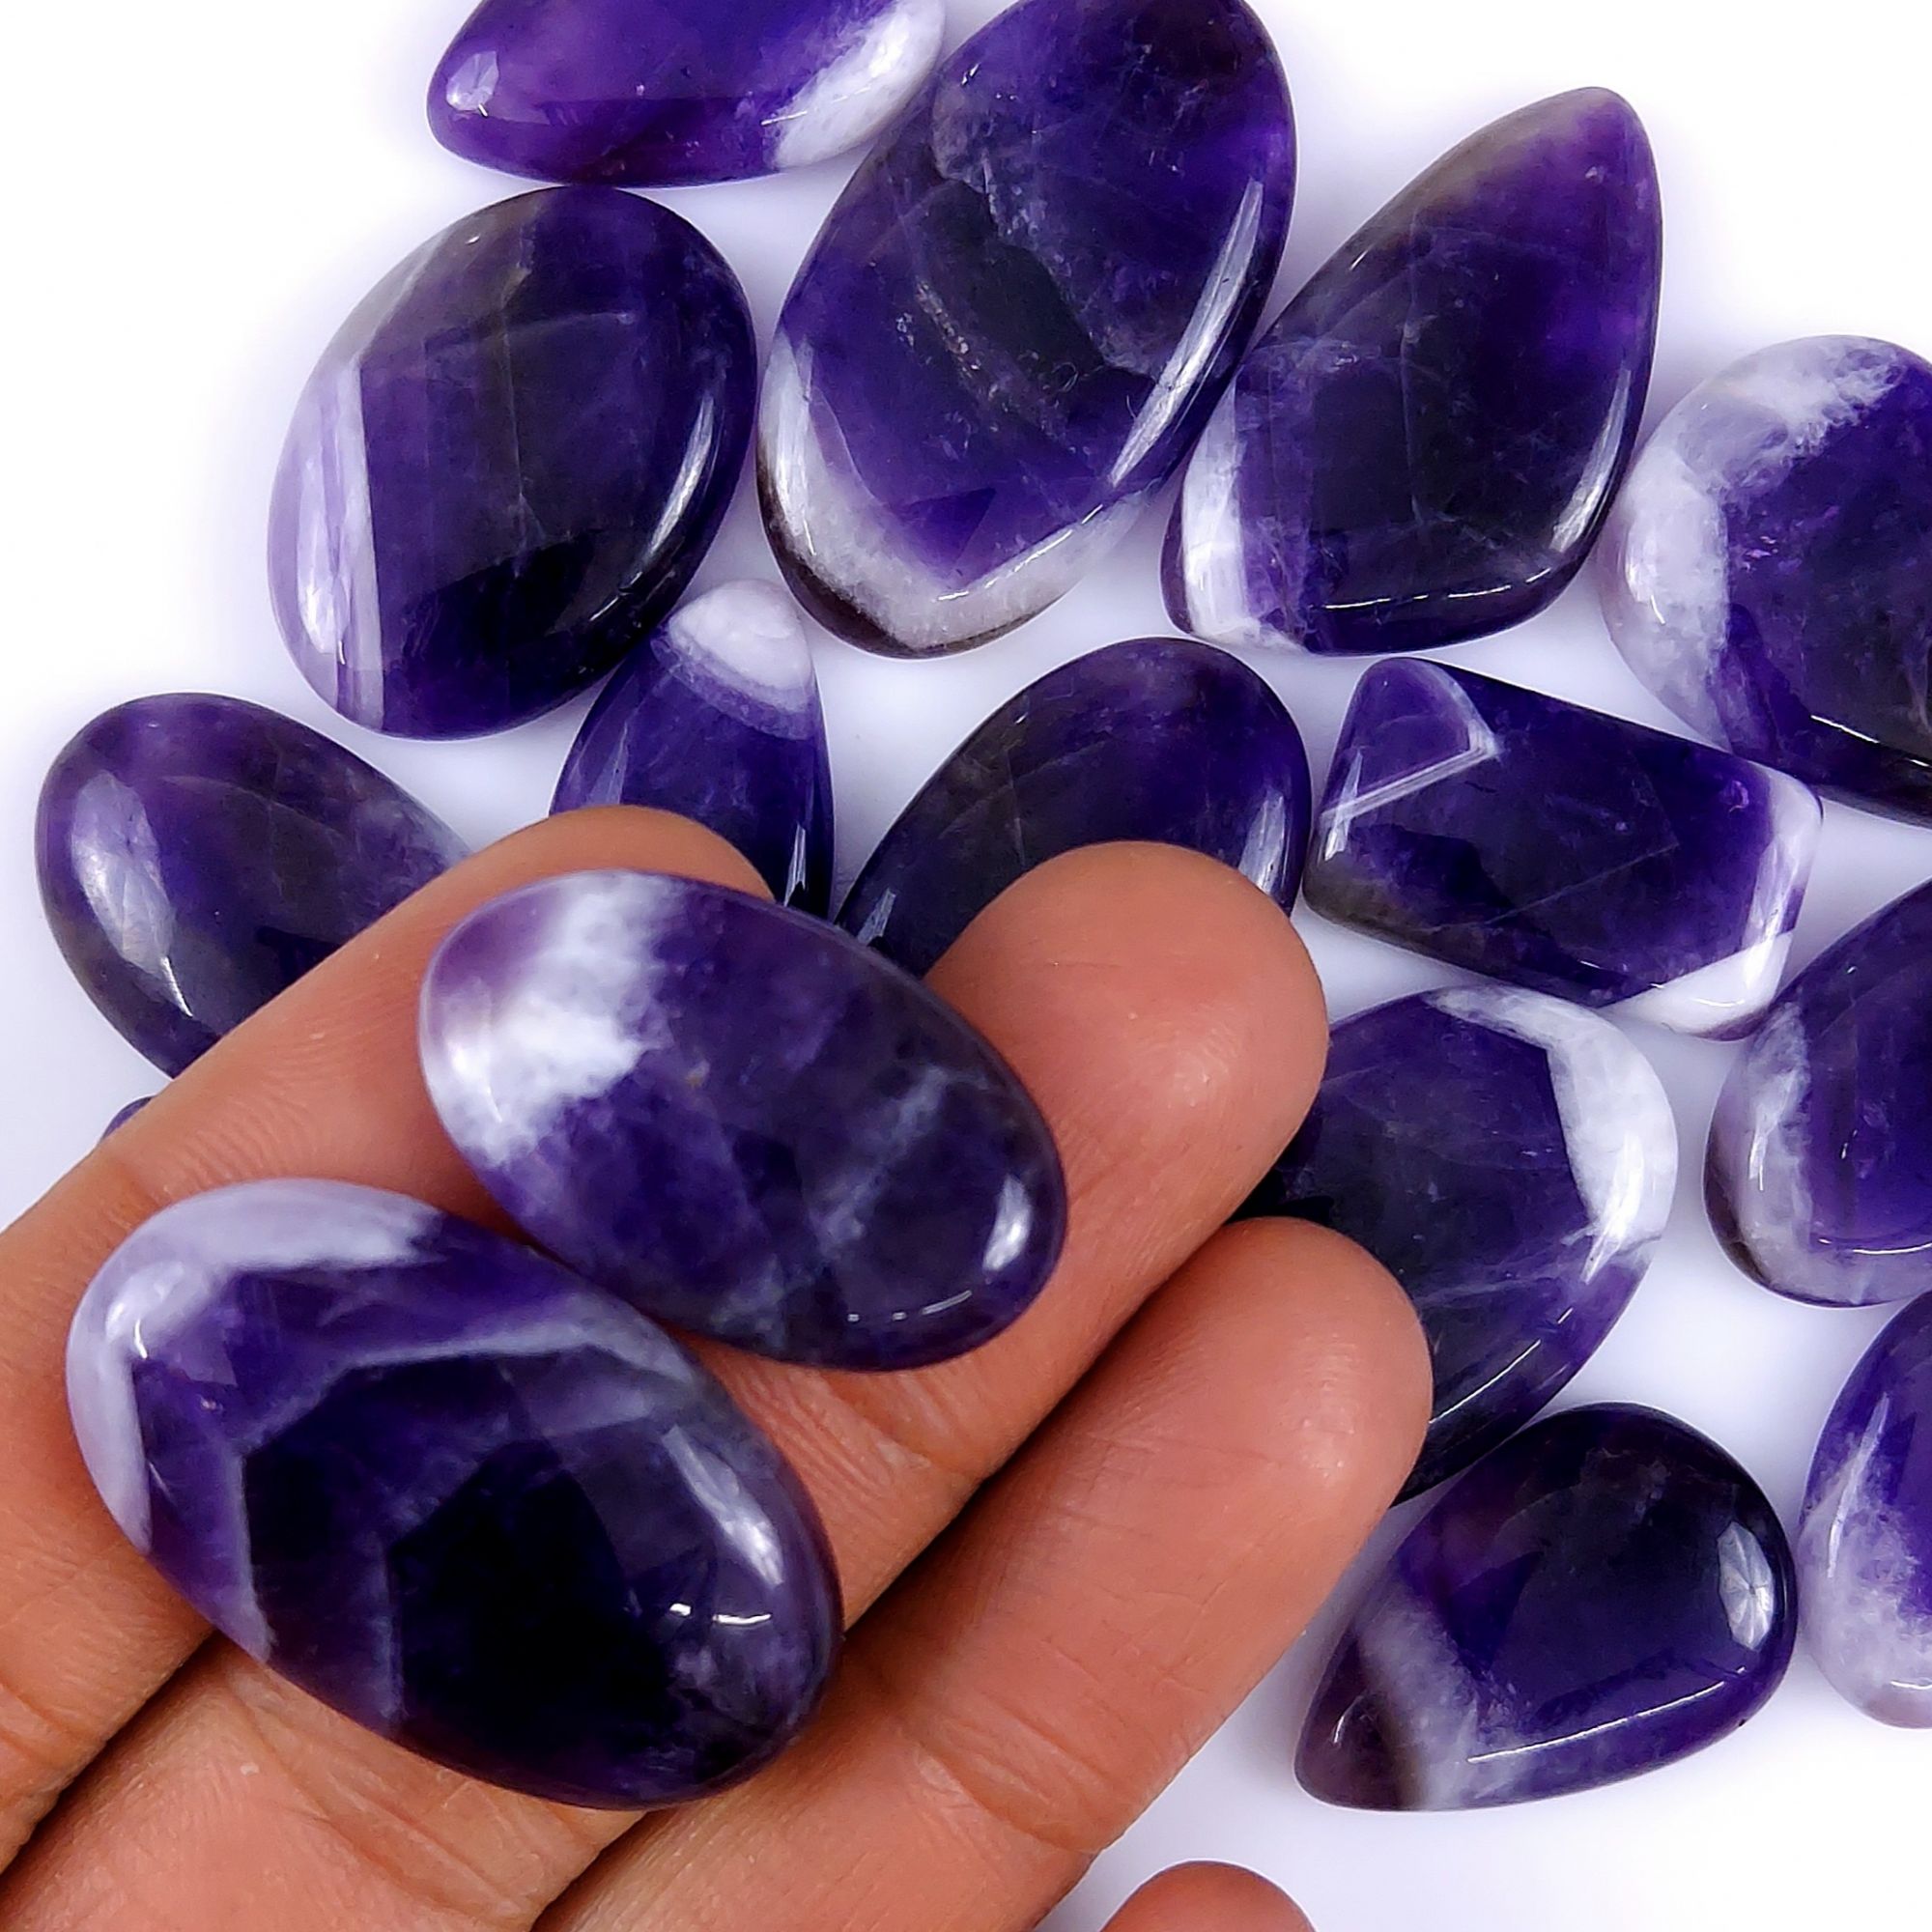 17Pcs 414Cts Natural Amethyst Cabochon lot Gemstone Purple Crystal Mix Shape Loose Gemstone beads for jewelry Making 36x20 20x14mm#7510